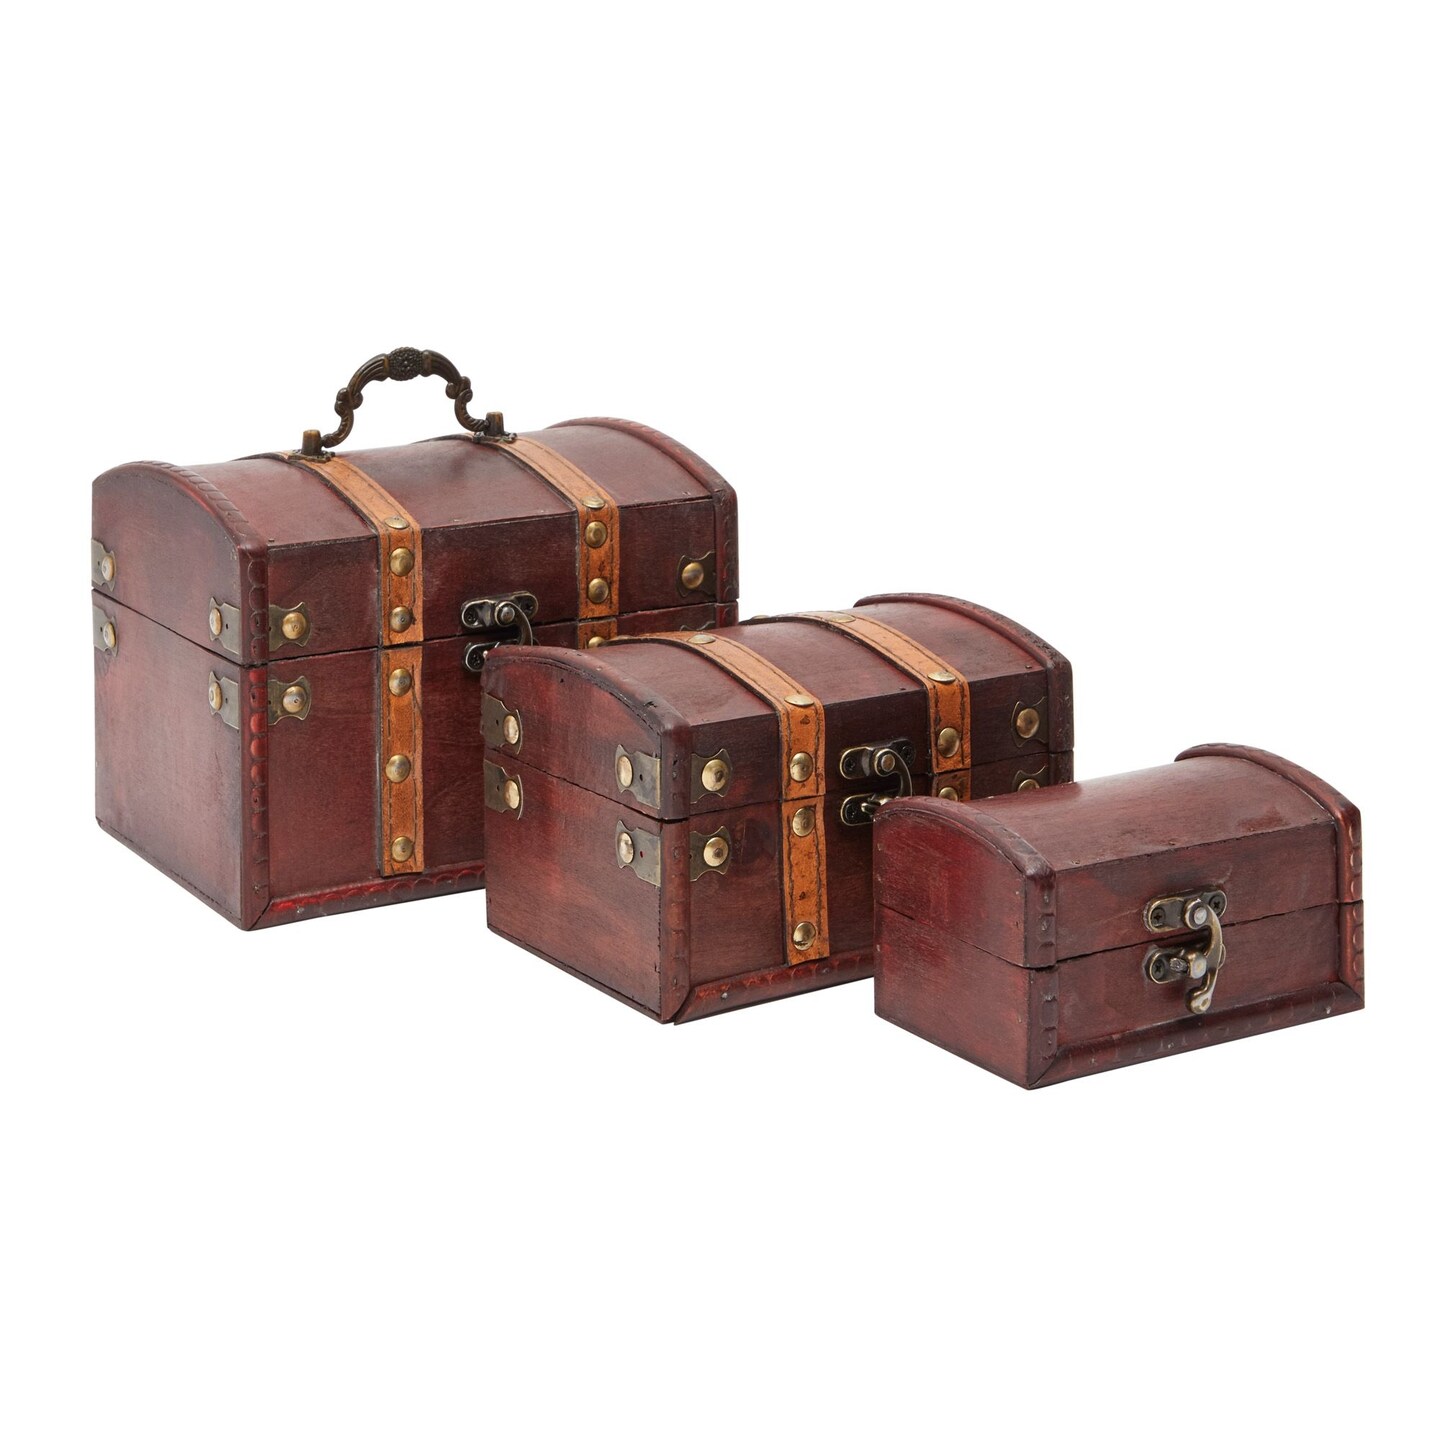 Set of 3 Small Wooden Treasure Chest Boxes, Decorative Vintage Style Storage Boxes for Jewelry Keepsakes (3 Sizes)